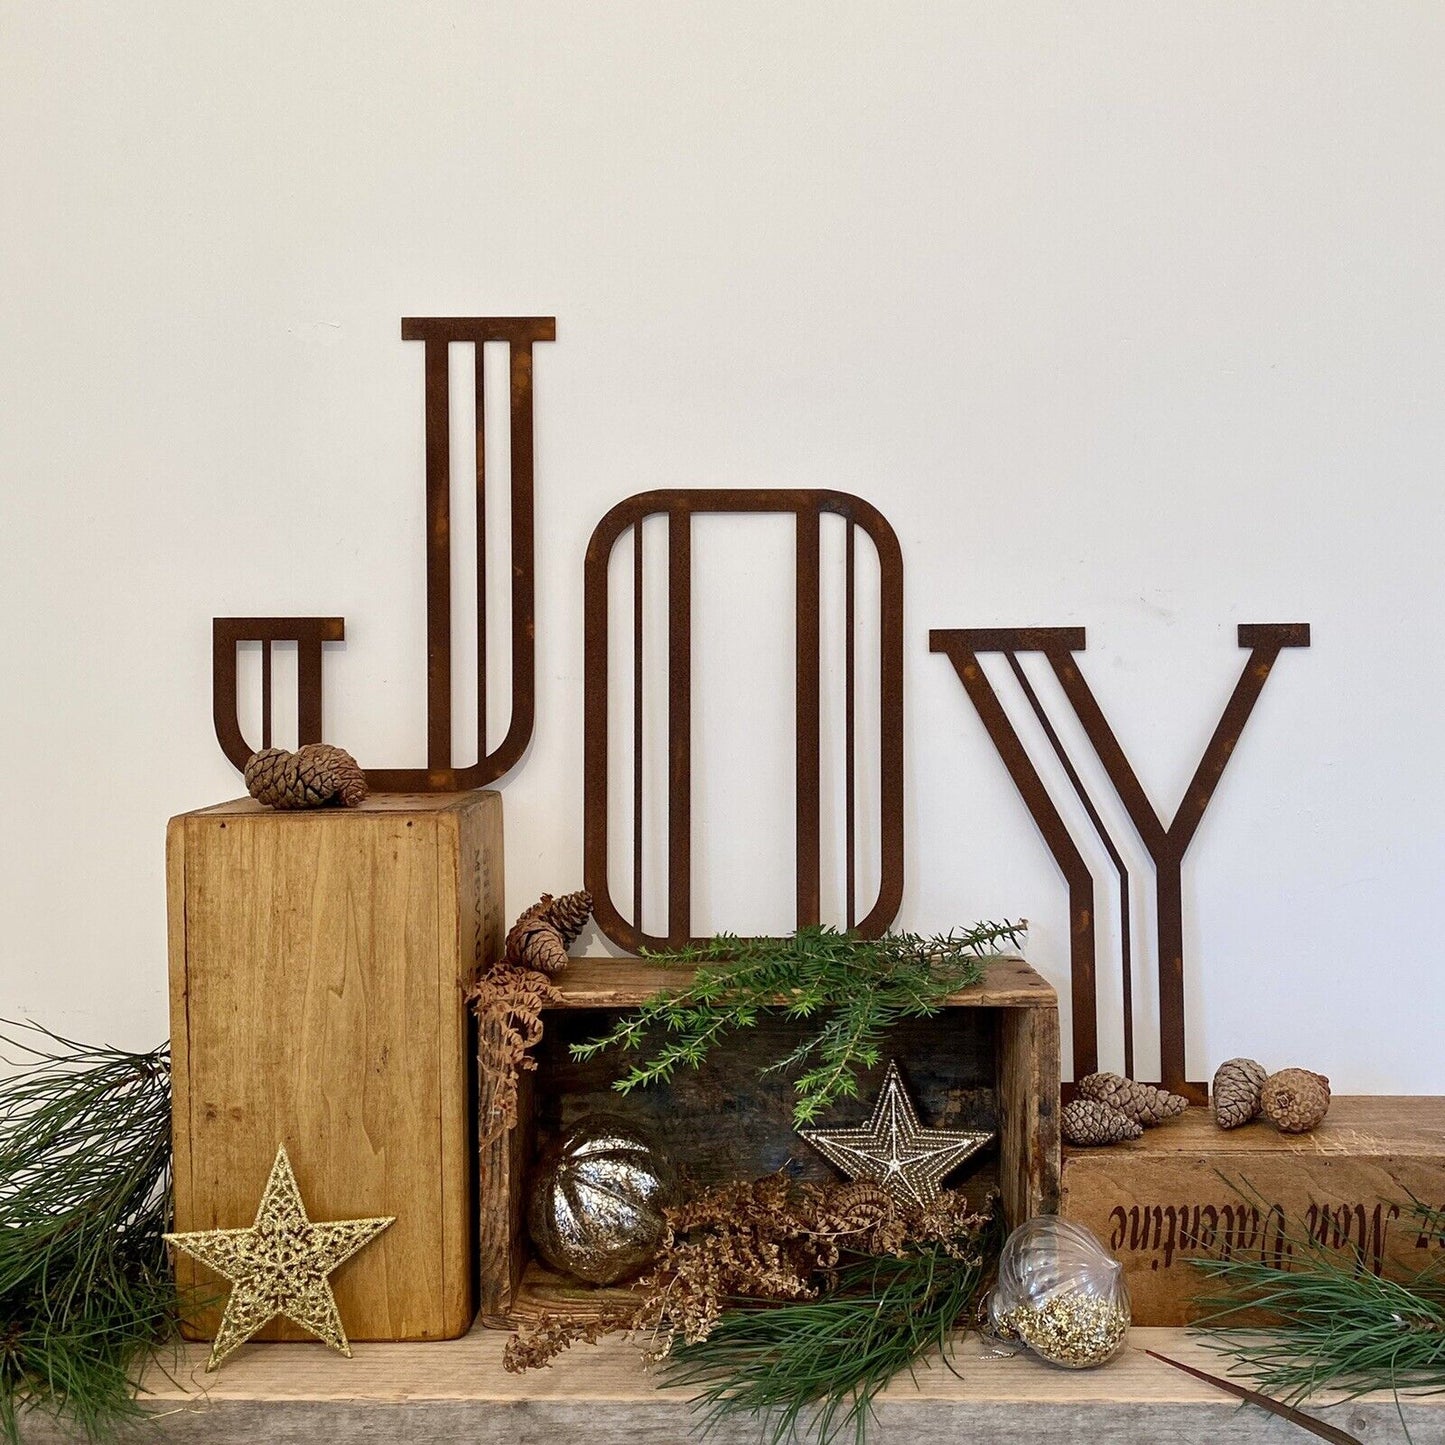 JOY Art Deco Rusty Metel Letters 12 Inches Tall Christmas Mantle Fireplace Decoration